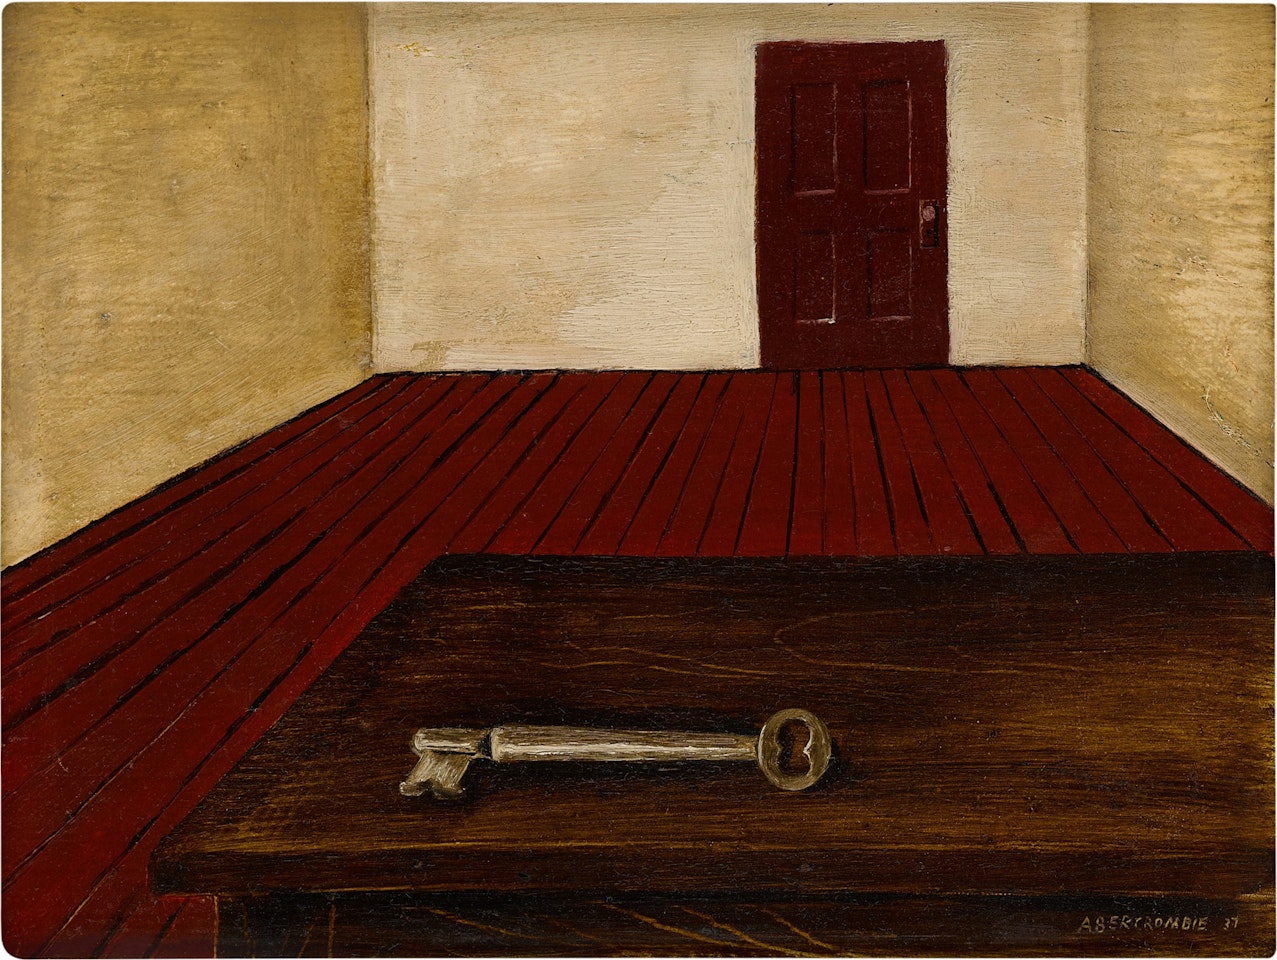 Untitled (Key on Table) by Gertrude Abercrombie